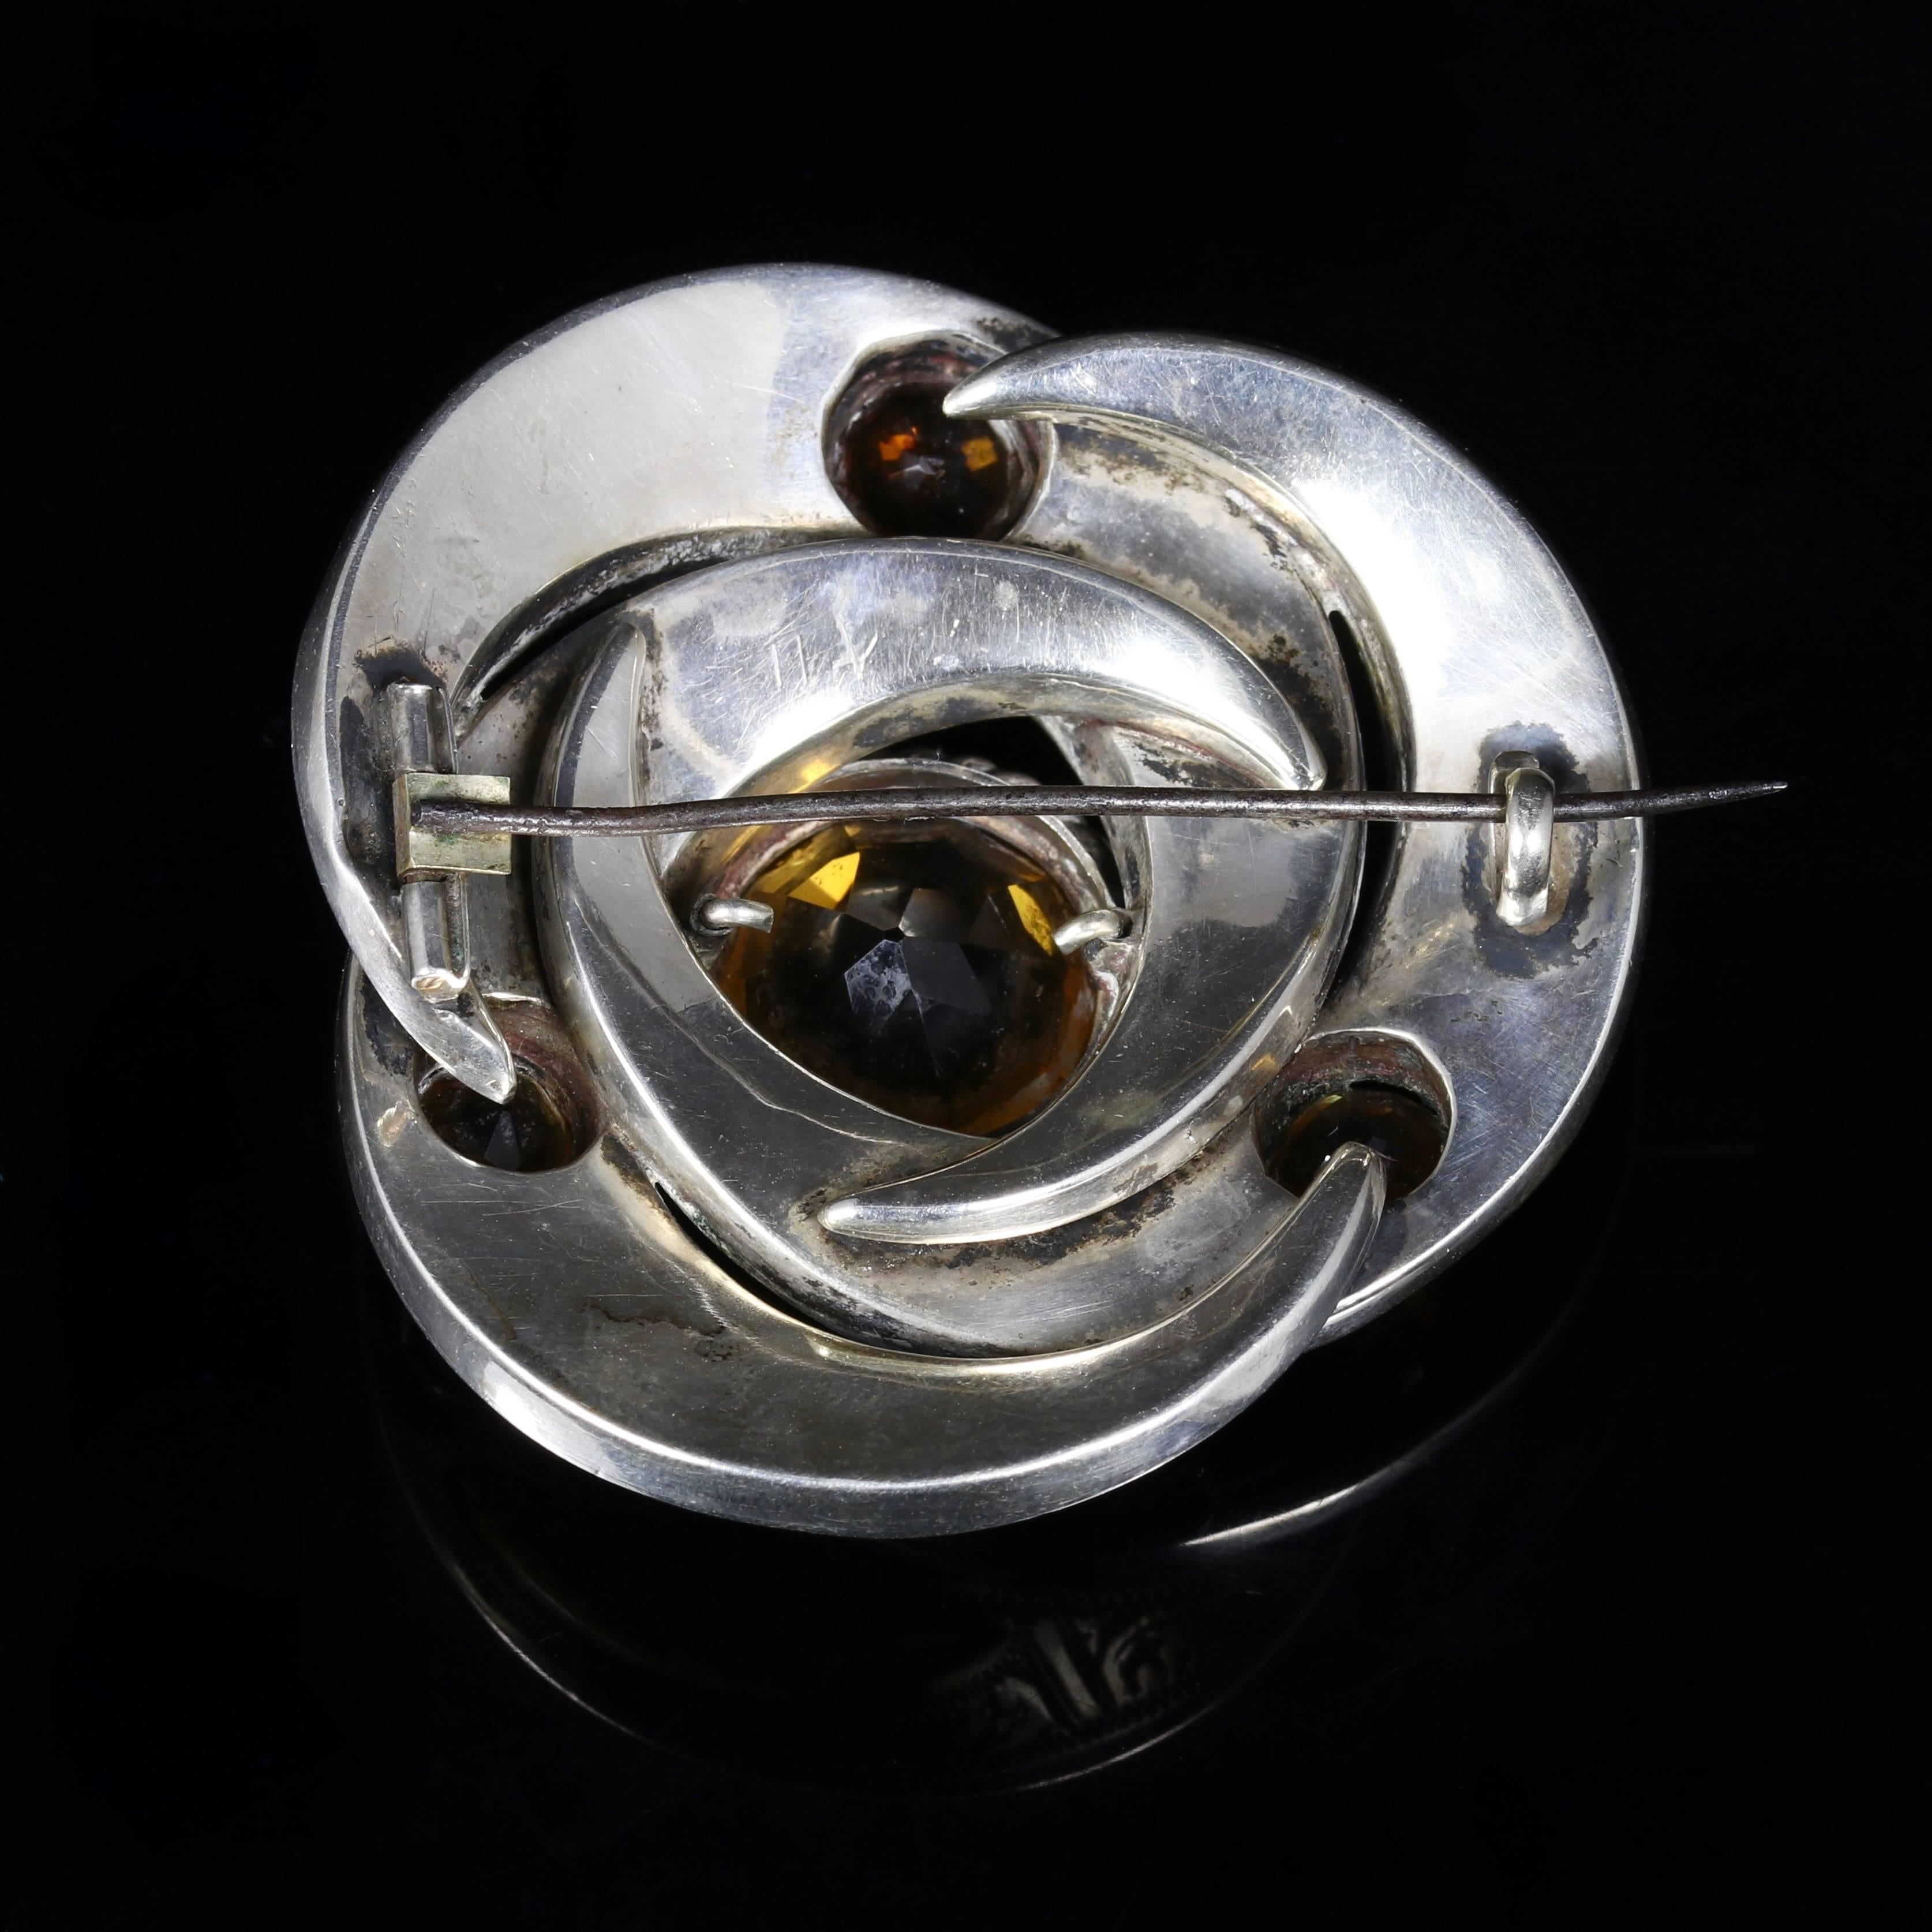 This is a fabulous large Sterling Silver Scottish Agate brooch.

Set with a beautiful Cairngorm in the centre complimented with smaller Cairngorms and polished Agates which are set into the Scottish Silver Agate Gallery.

The brooch is quite large